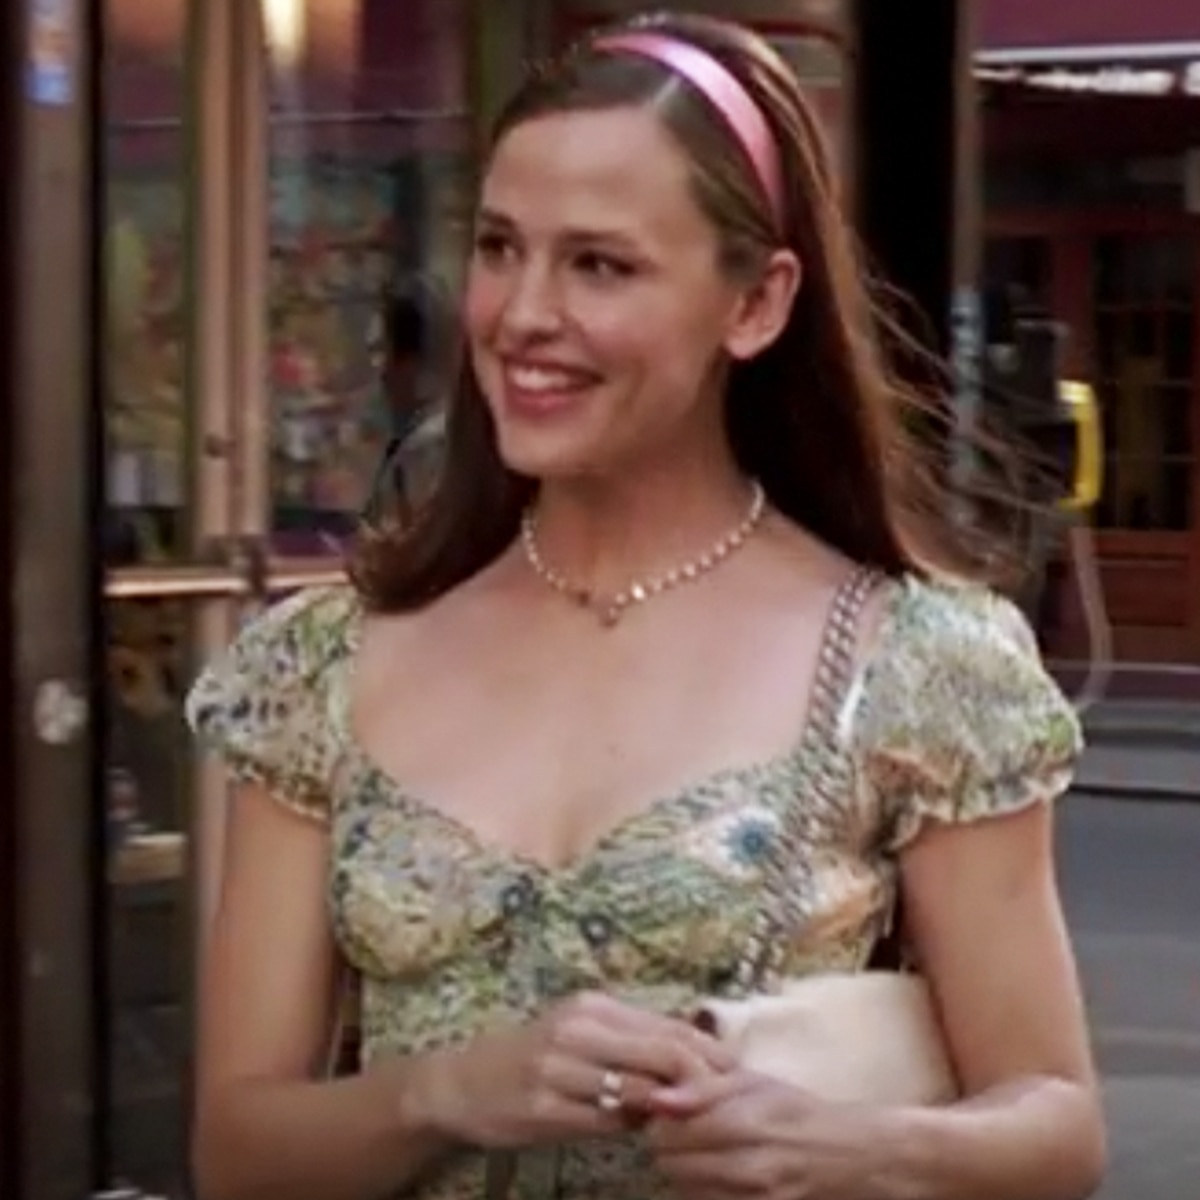 13 Going On 30 Cast: Where The Actors Are Now